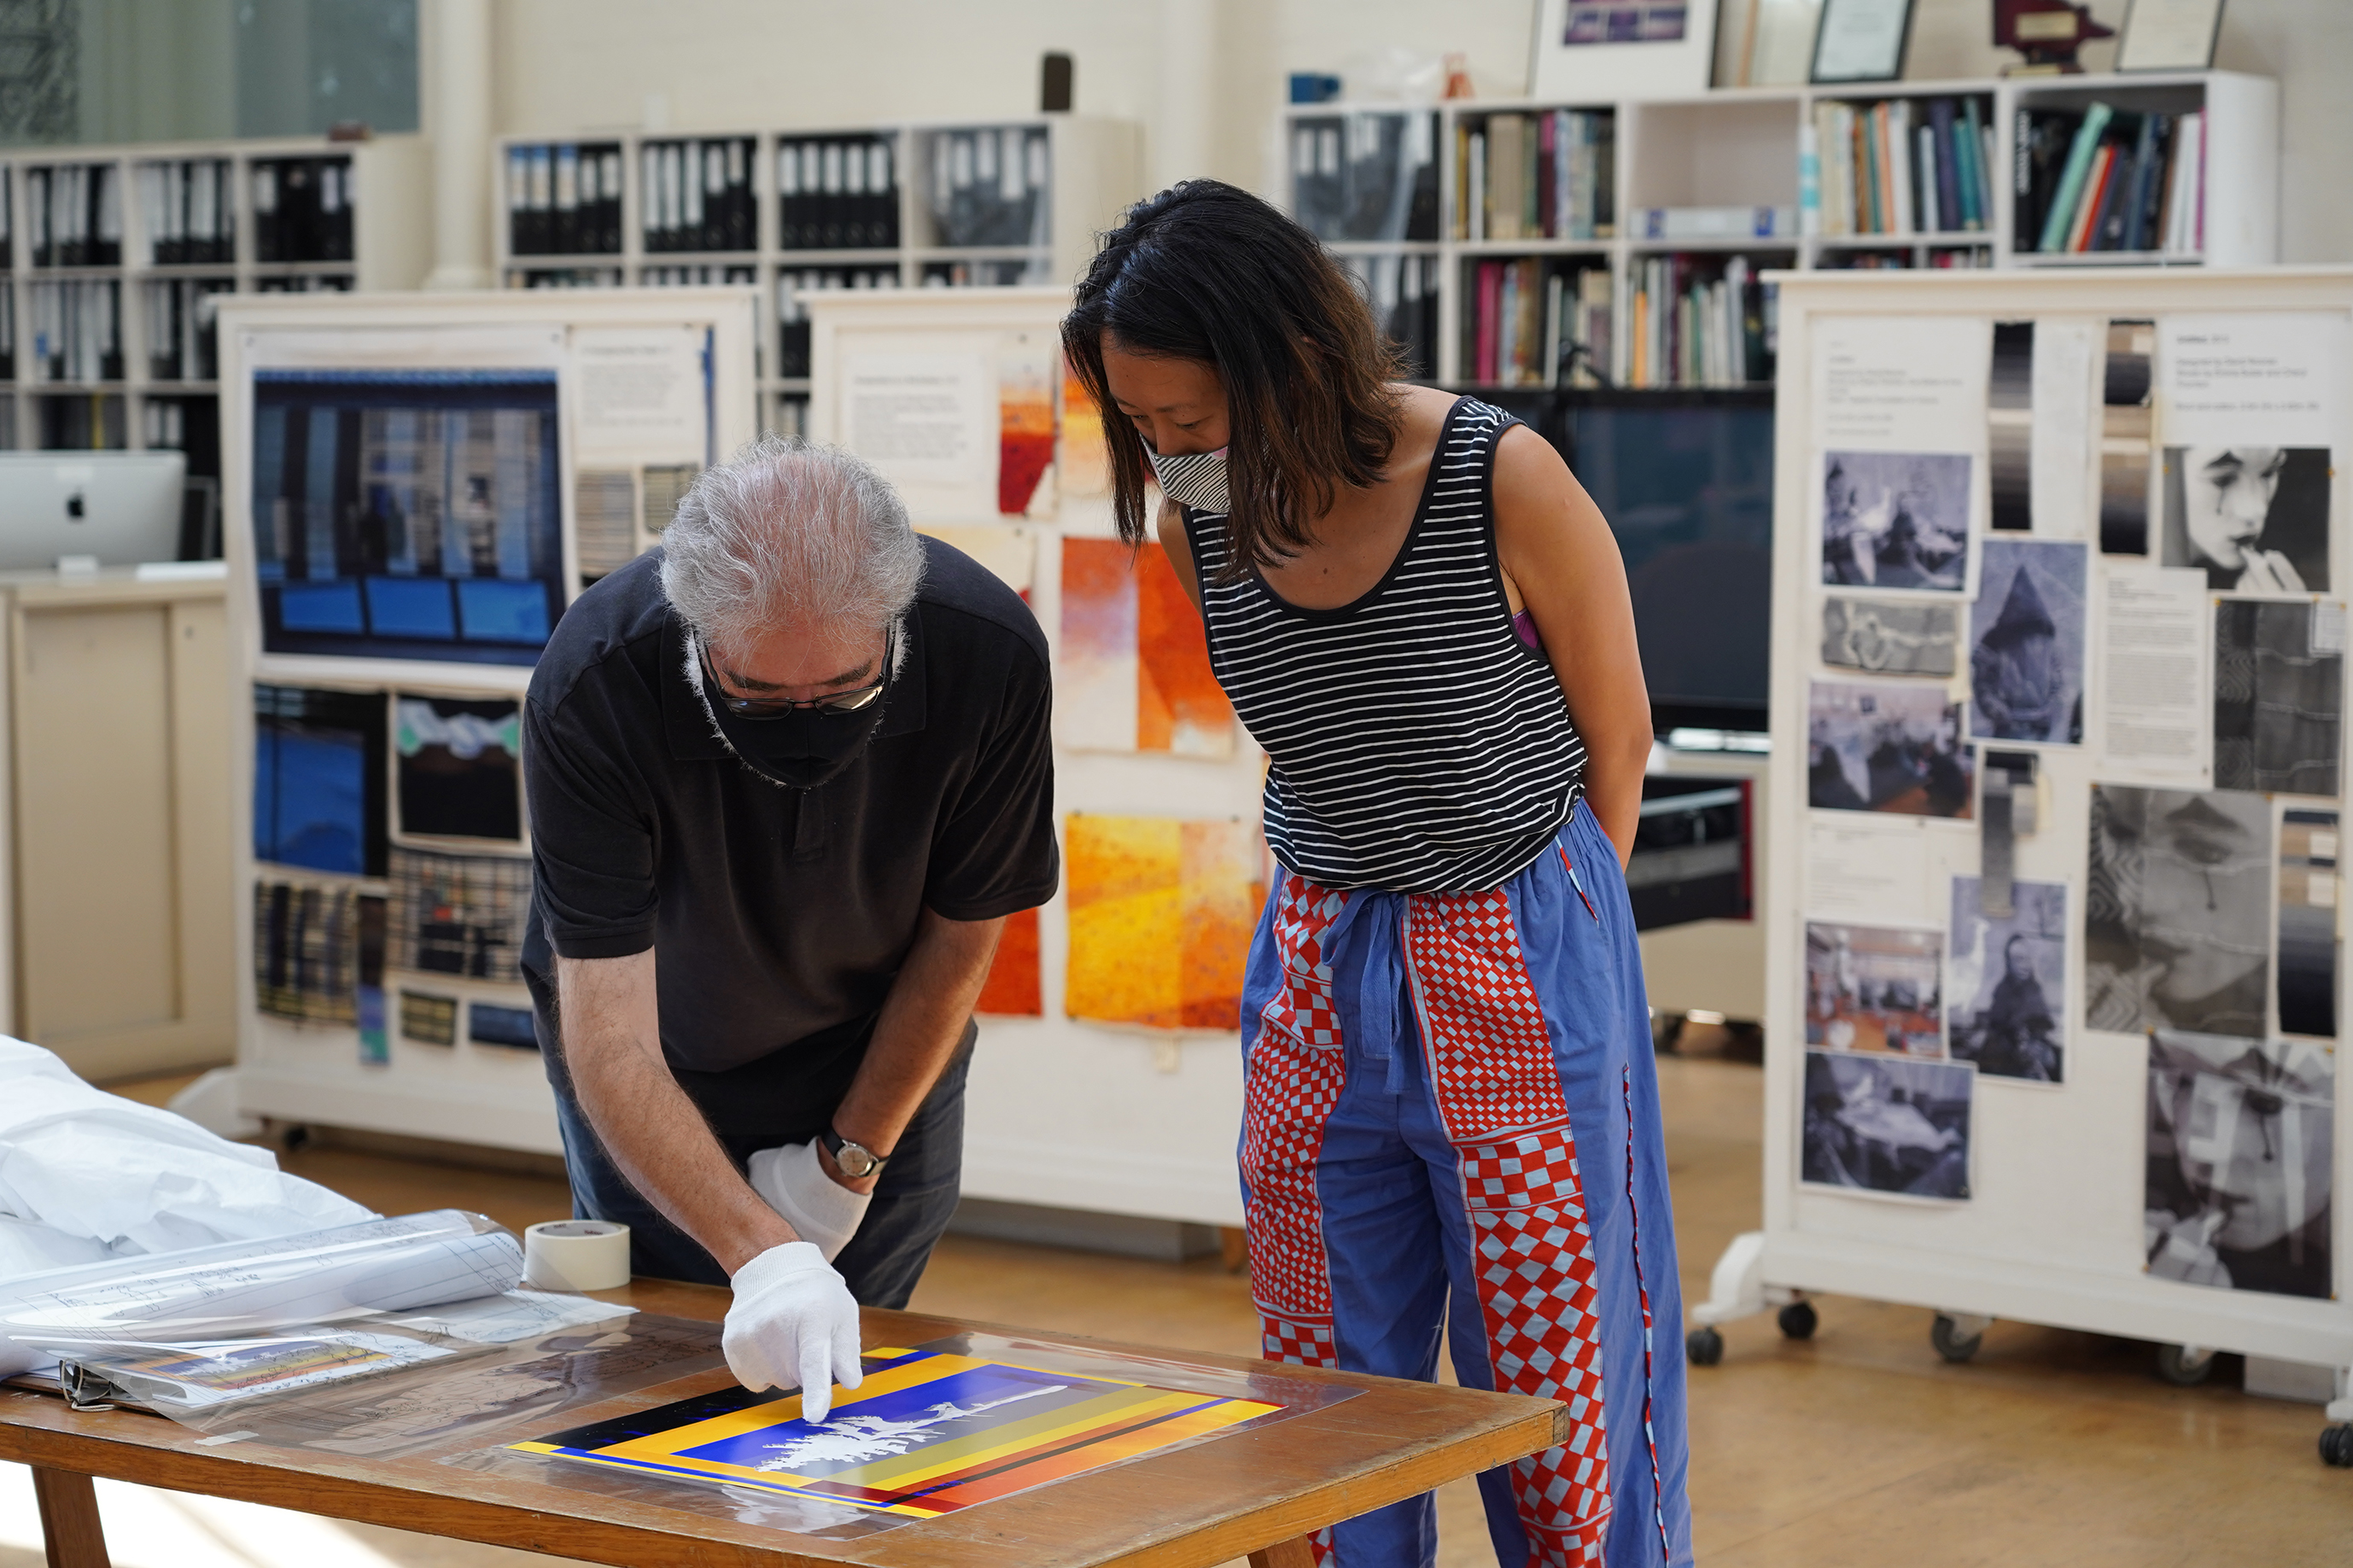 ATW weaver Tim Gresham & artist Eugenia Lim discussing the 'Future Fossils (Old Tjikko)' tapestry design at the ATW, 2021. Image: ATW.